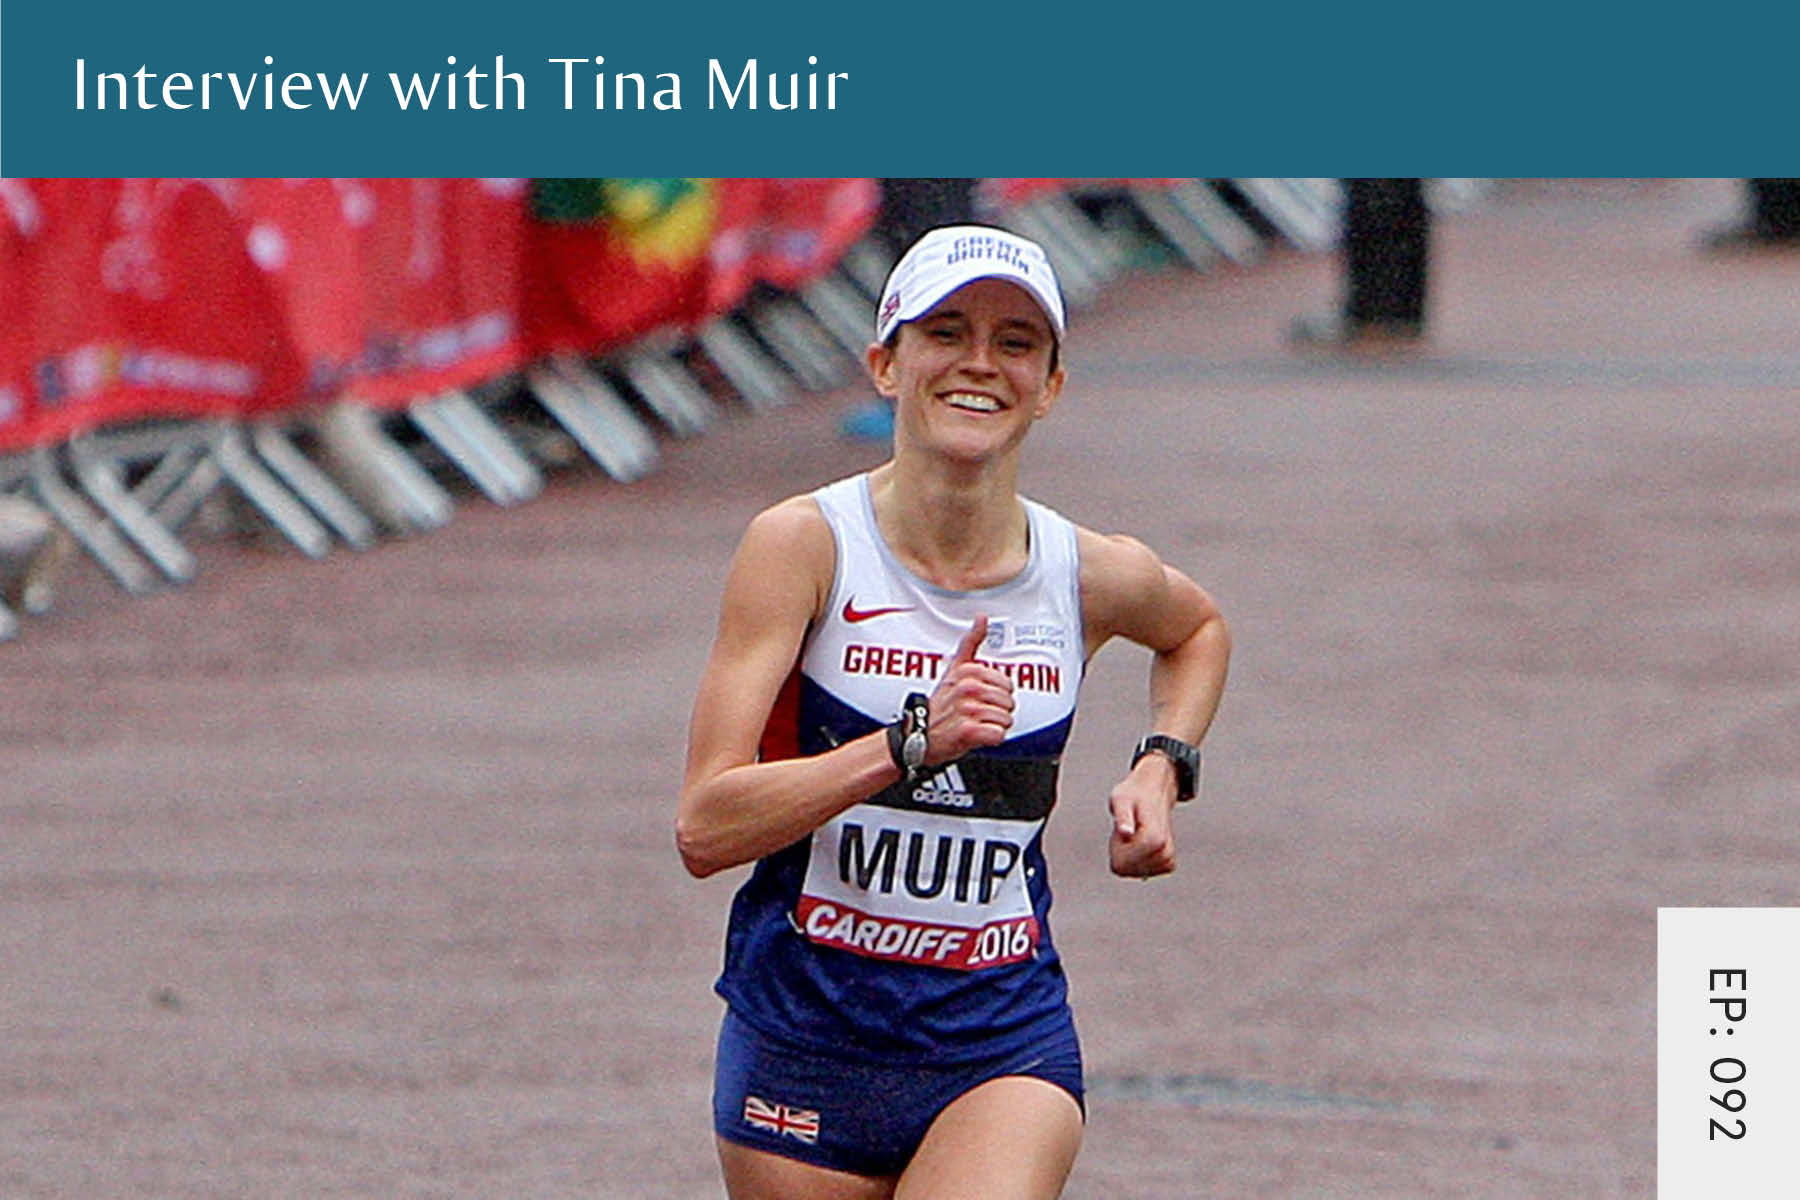 092: Interview with Tina Muir - Seven Health: Eating Disorder Recovery and Anti Diet Nutritionist